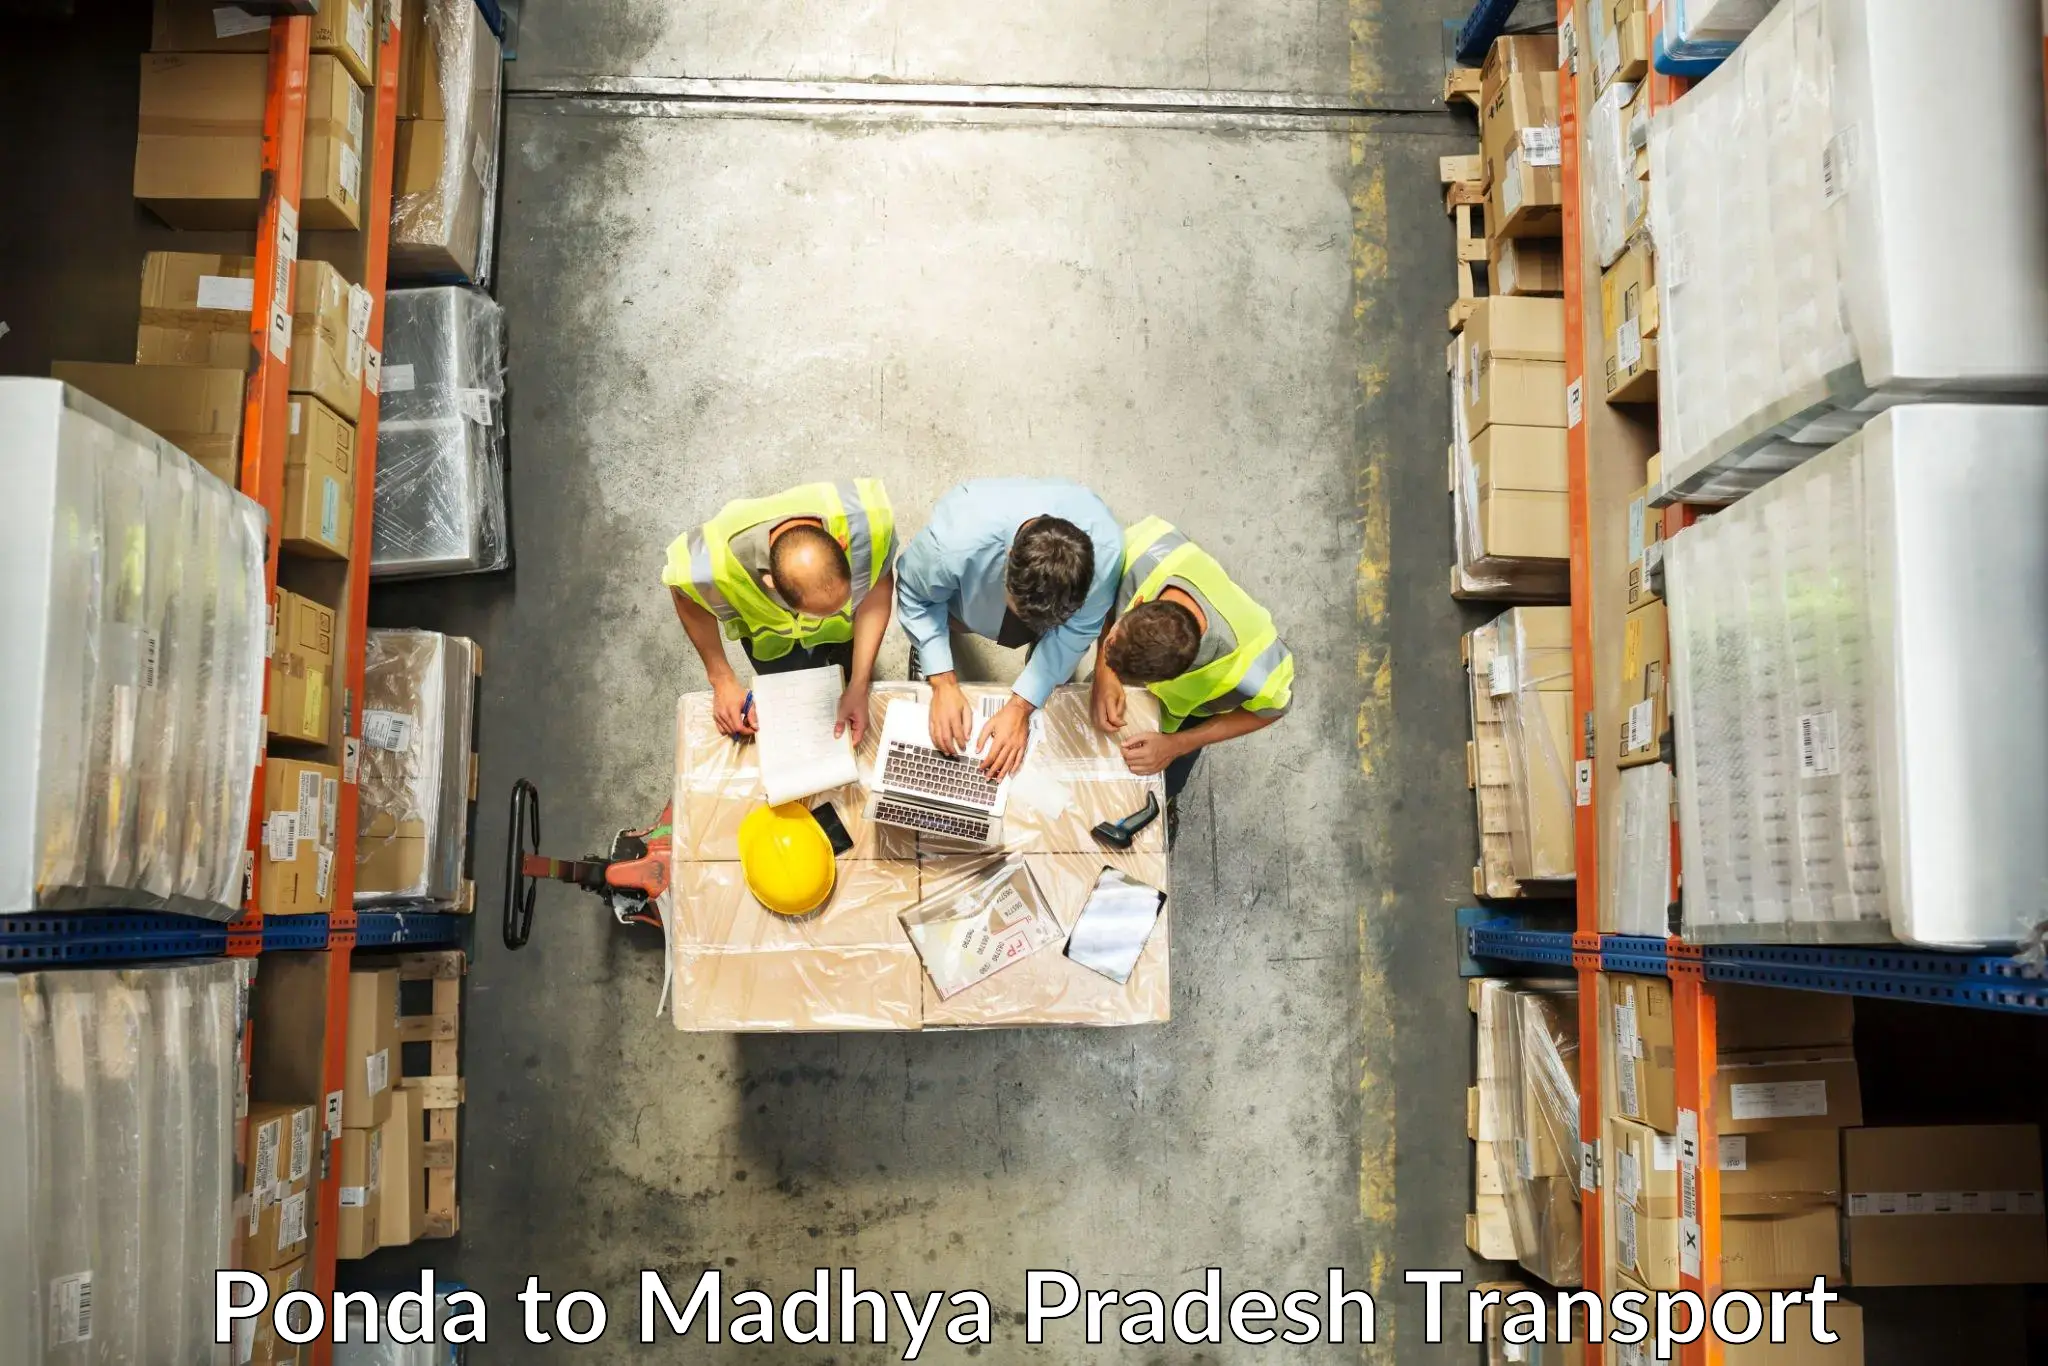 Container transport service Ponda to Khandwa